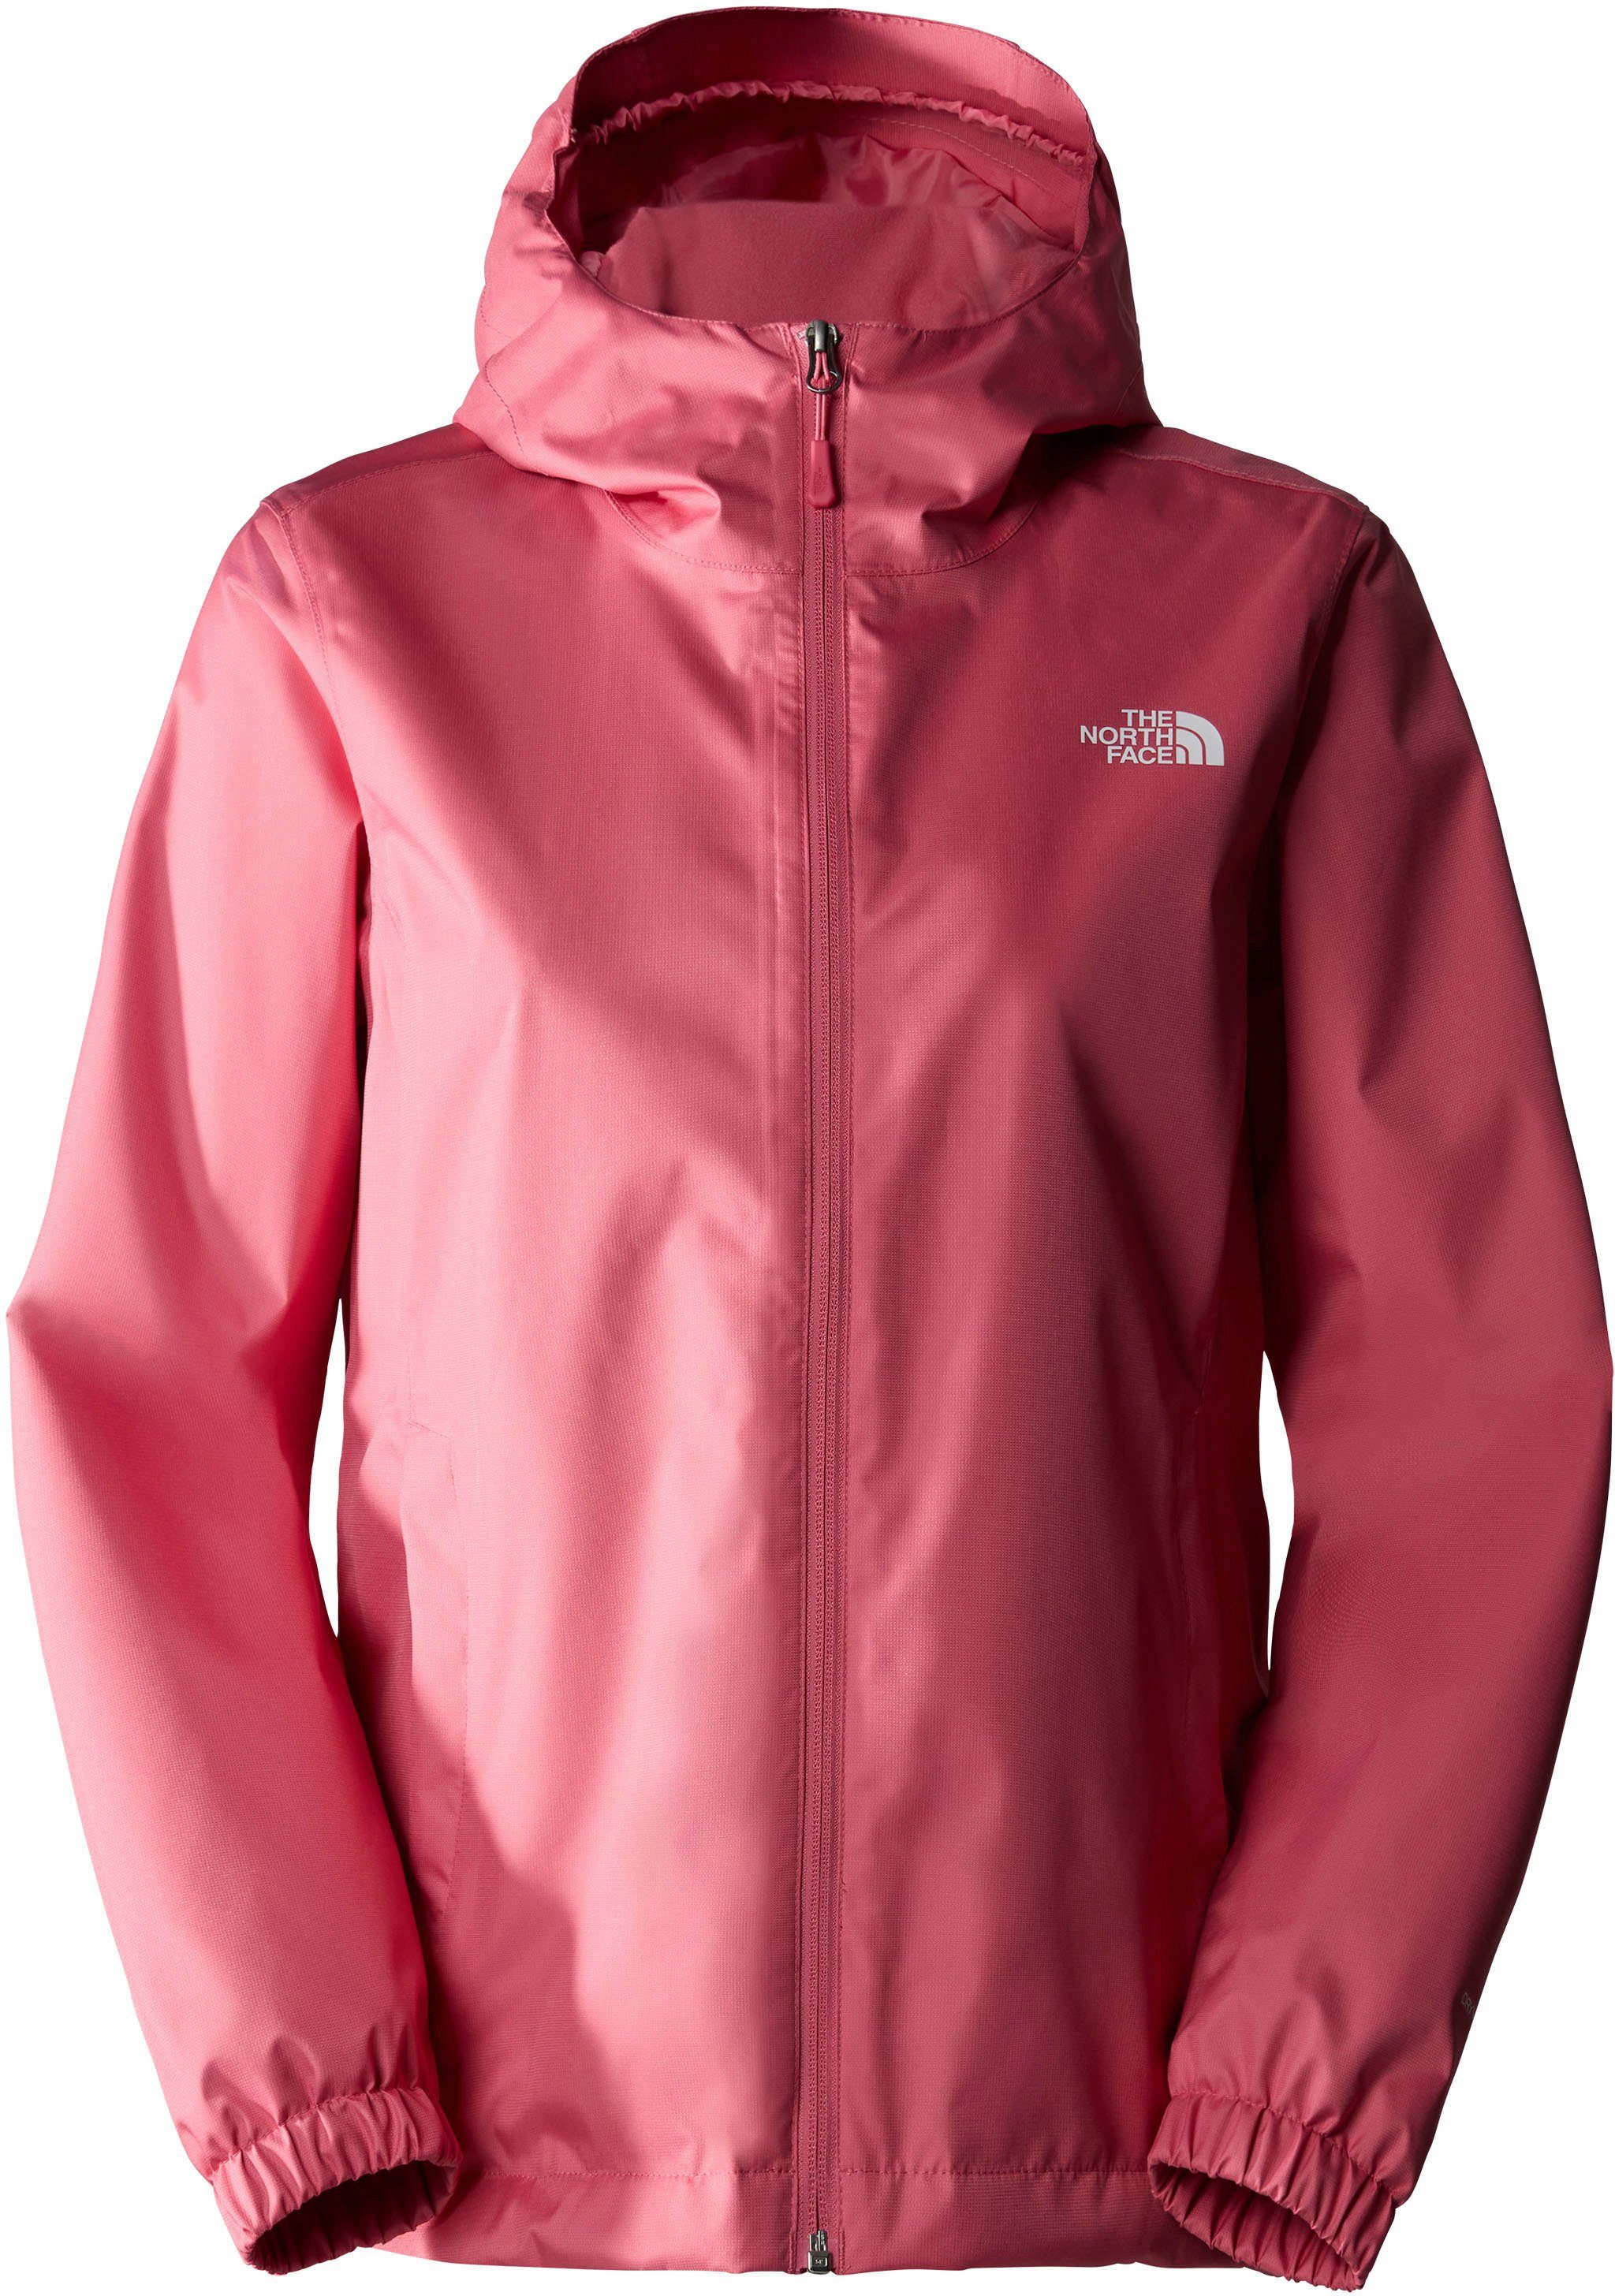 JACKET Funktionsjacke - cosmo W EU (1-St) The pink Logostickerei North Face mit QUEST